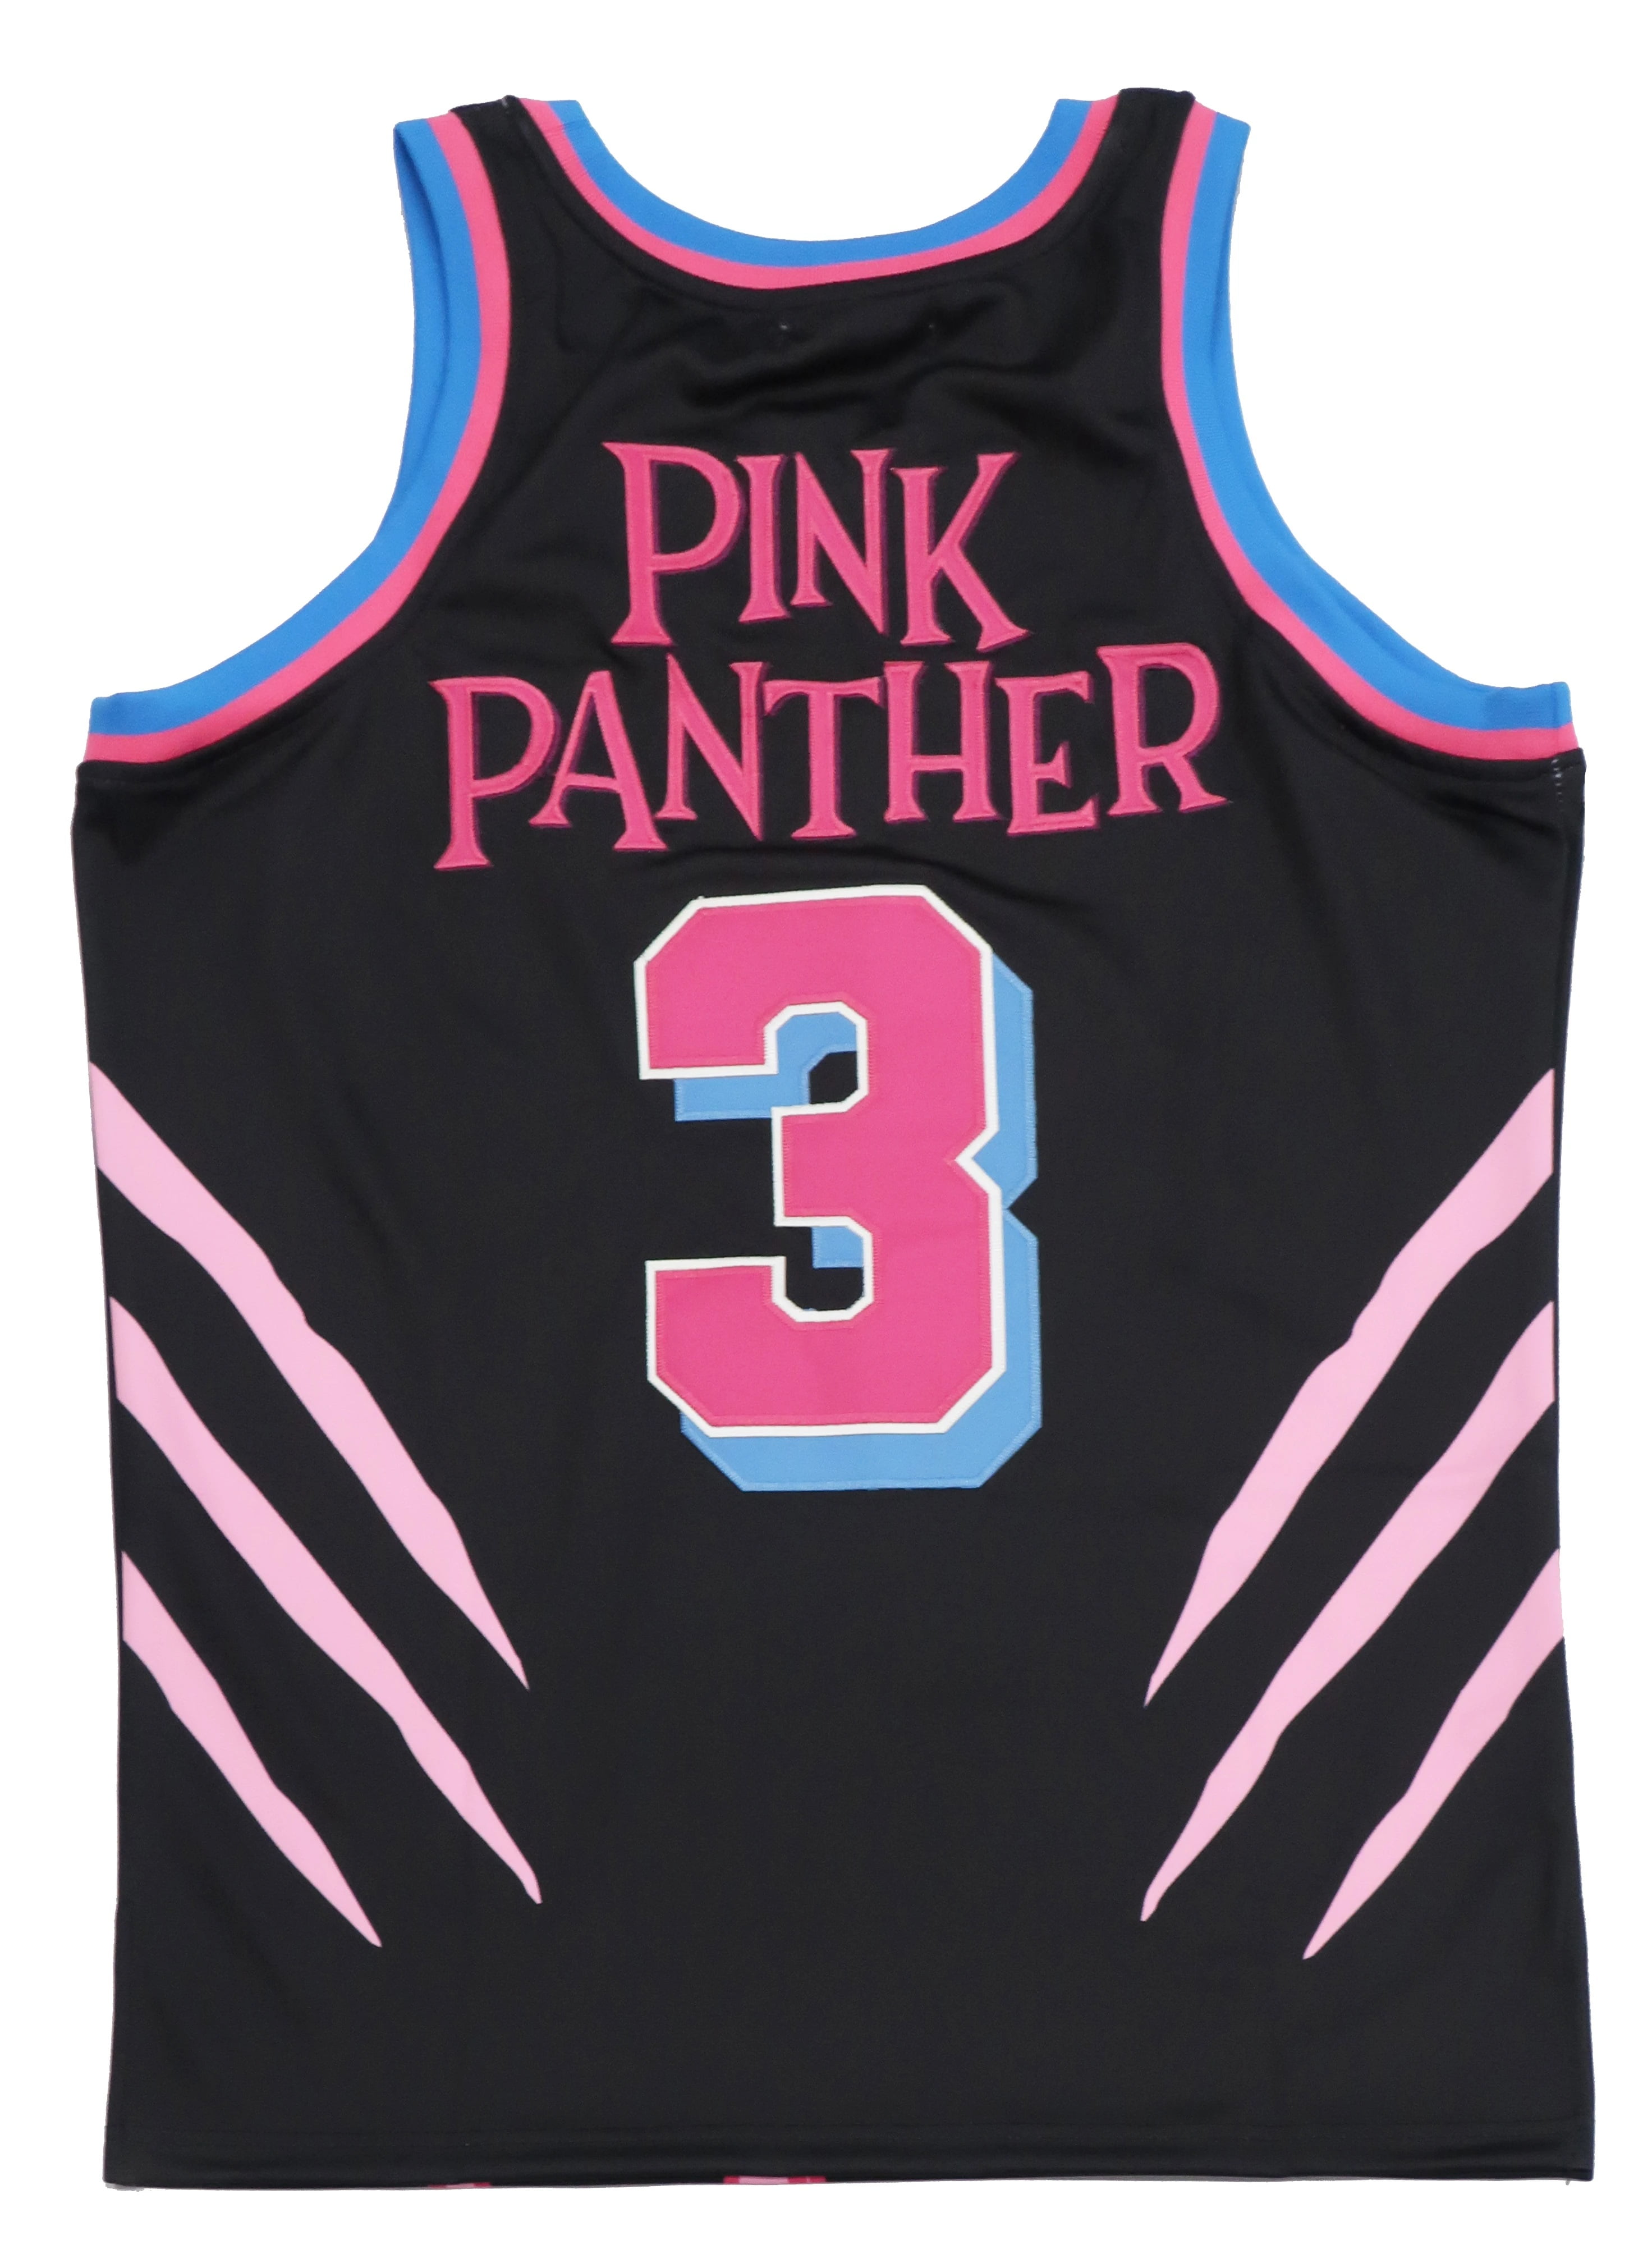 Pink Panther Miami Men's Headgear Classics Embroidered Basketball Jersey  (Small, Black) 